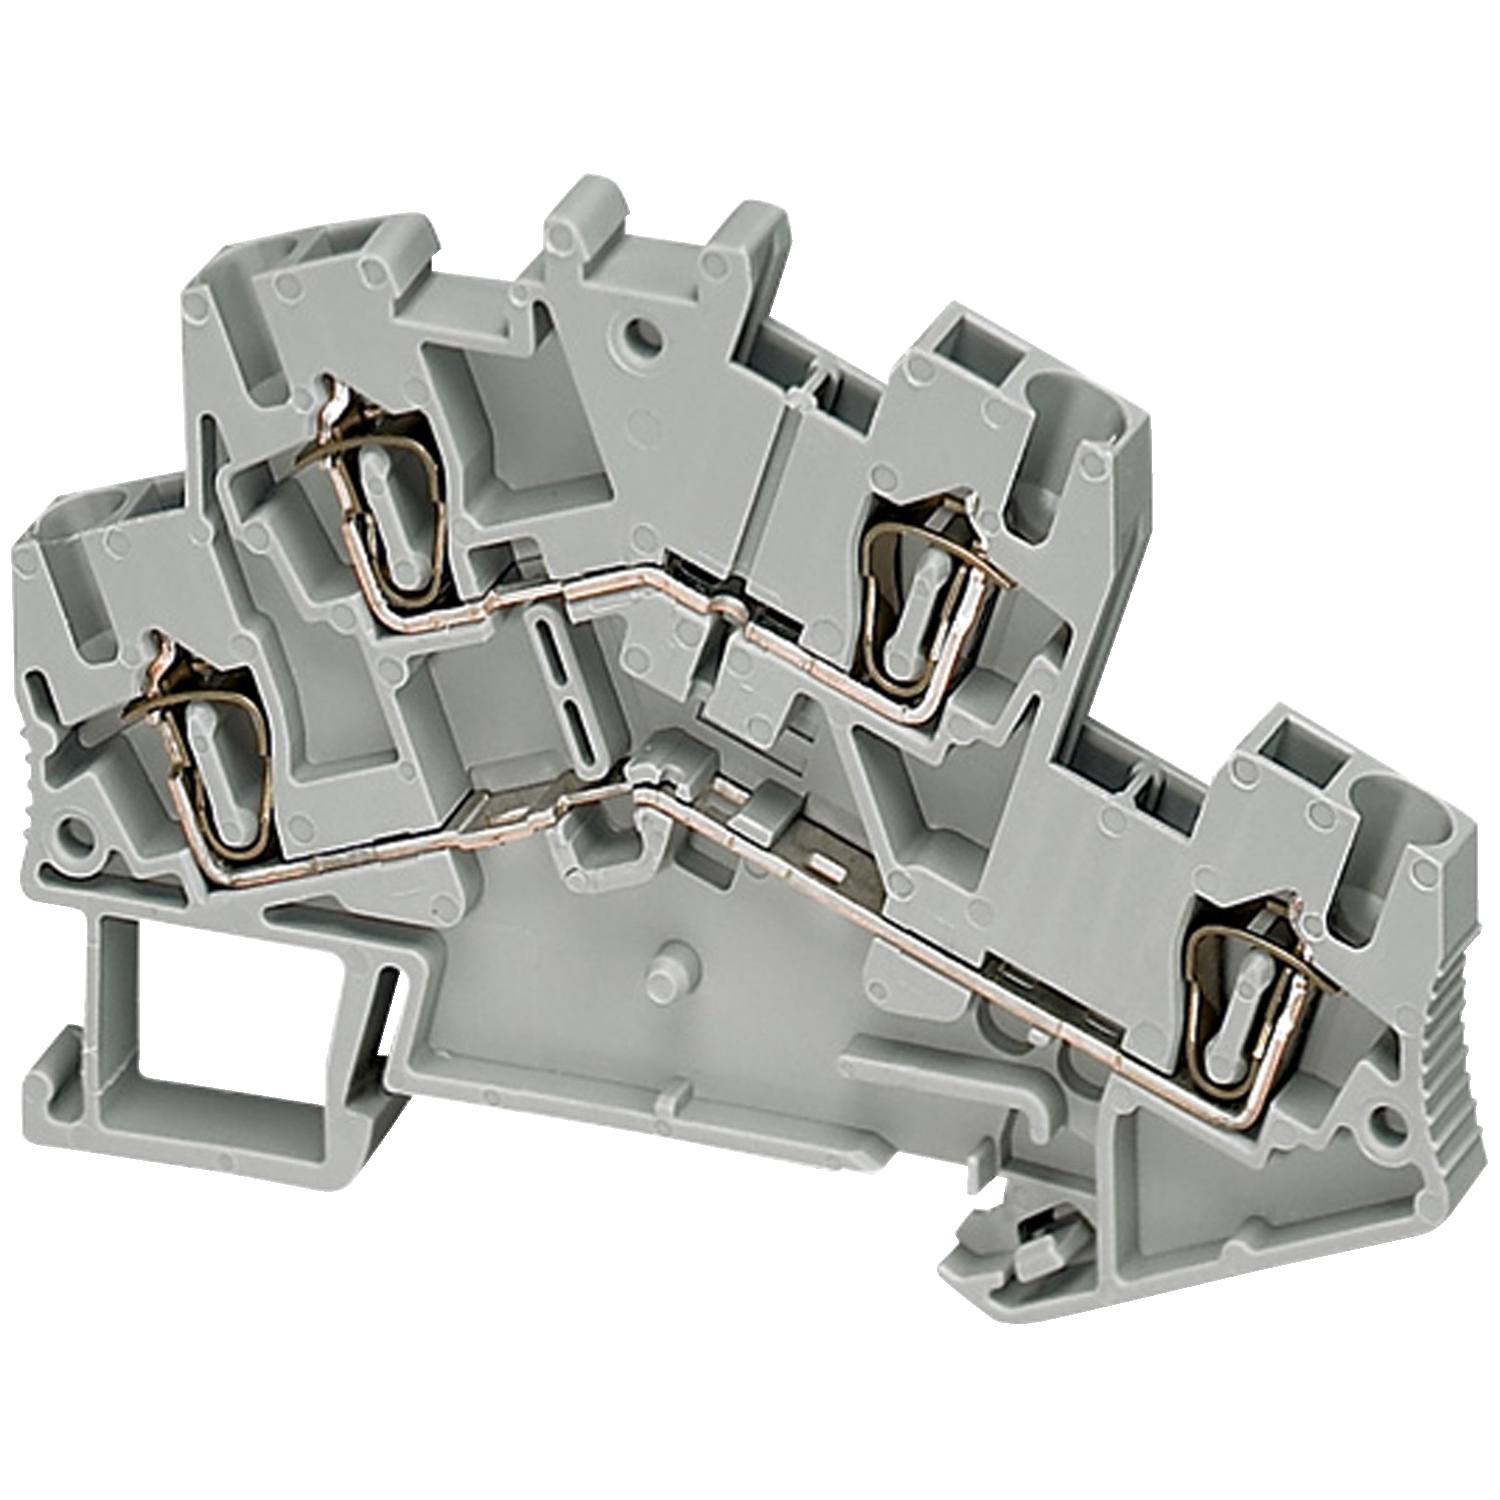 Terminal block, Linergy TR, spring type, feed through, 2 level, 4 points, 2.5mm², grey, set of 50